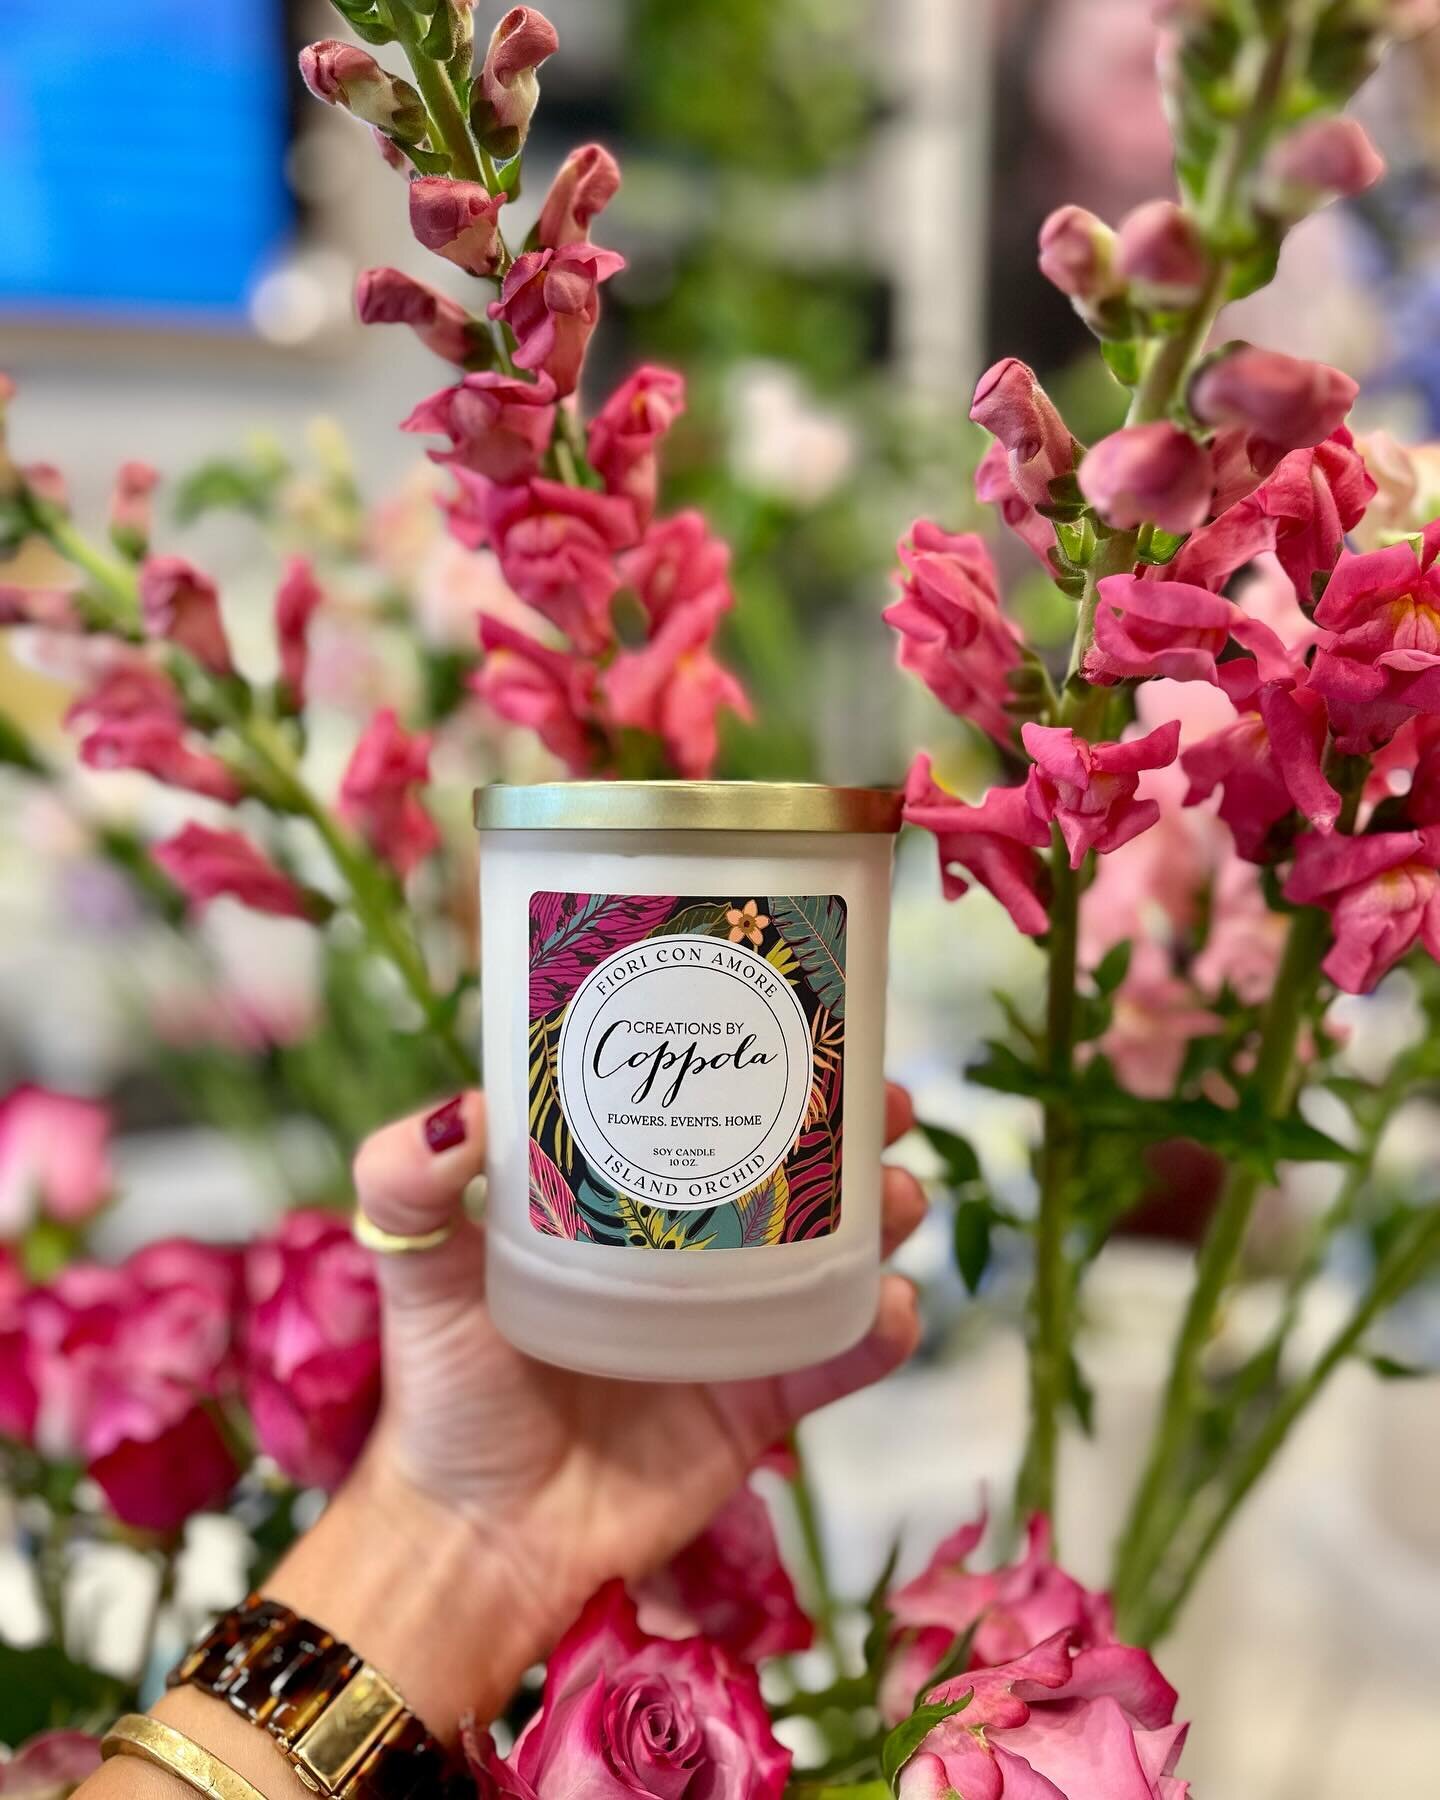 We dare you to find something better smelling than this candle! ✨🌊🌸